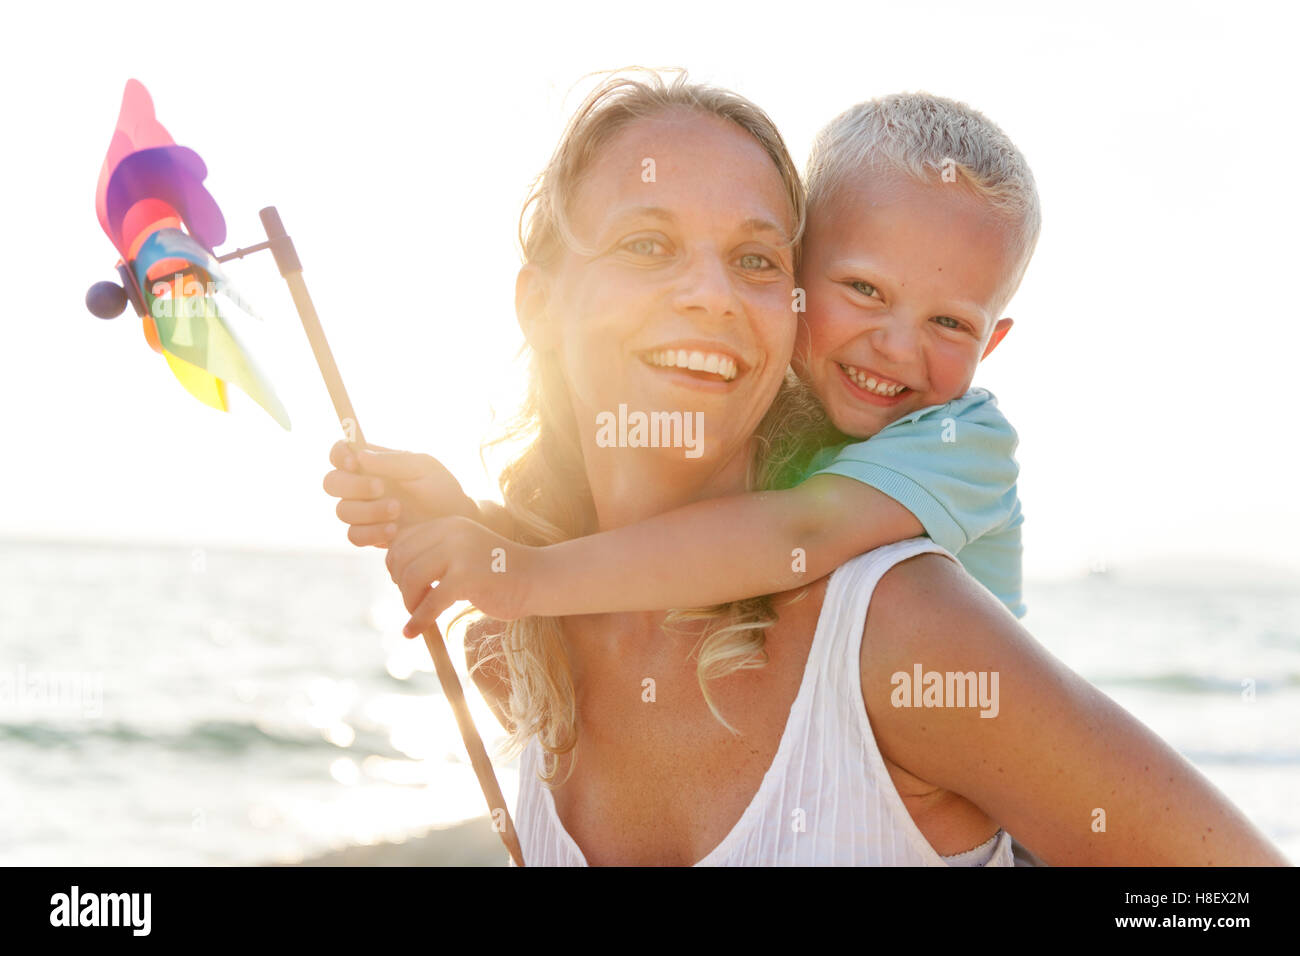 Turbine Paper Beach Carefree Playing Wind Concept Stock Photo